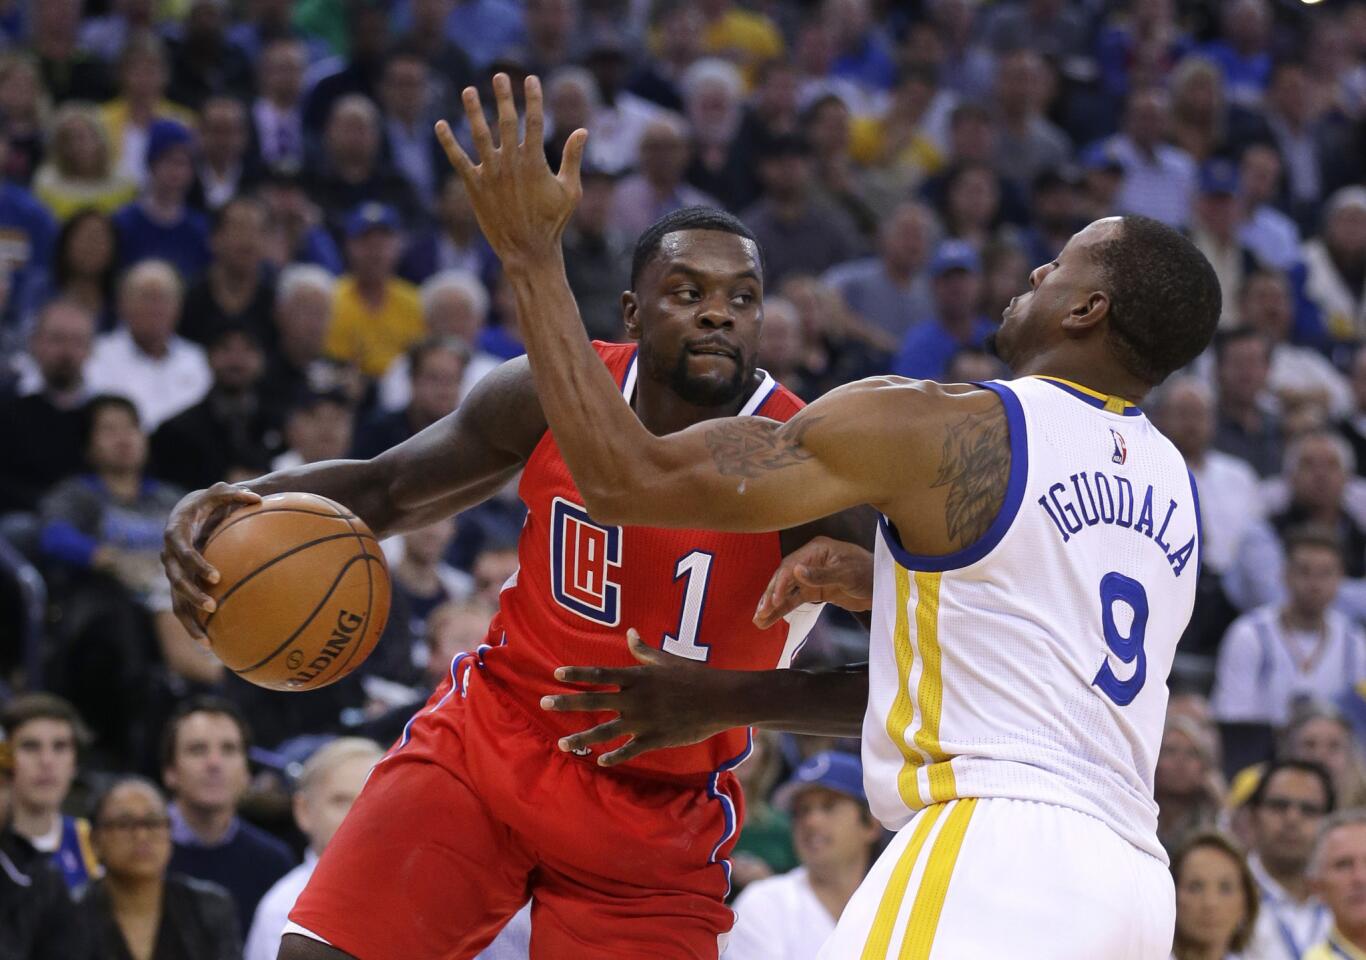 Clippers guard Lance Stephenson drives to the basket against Warriors forward Andre Iguodala in the first half.